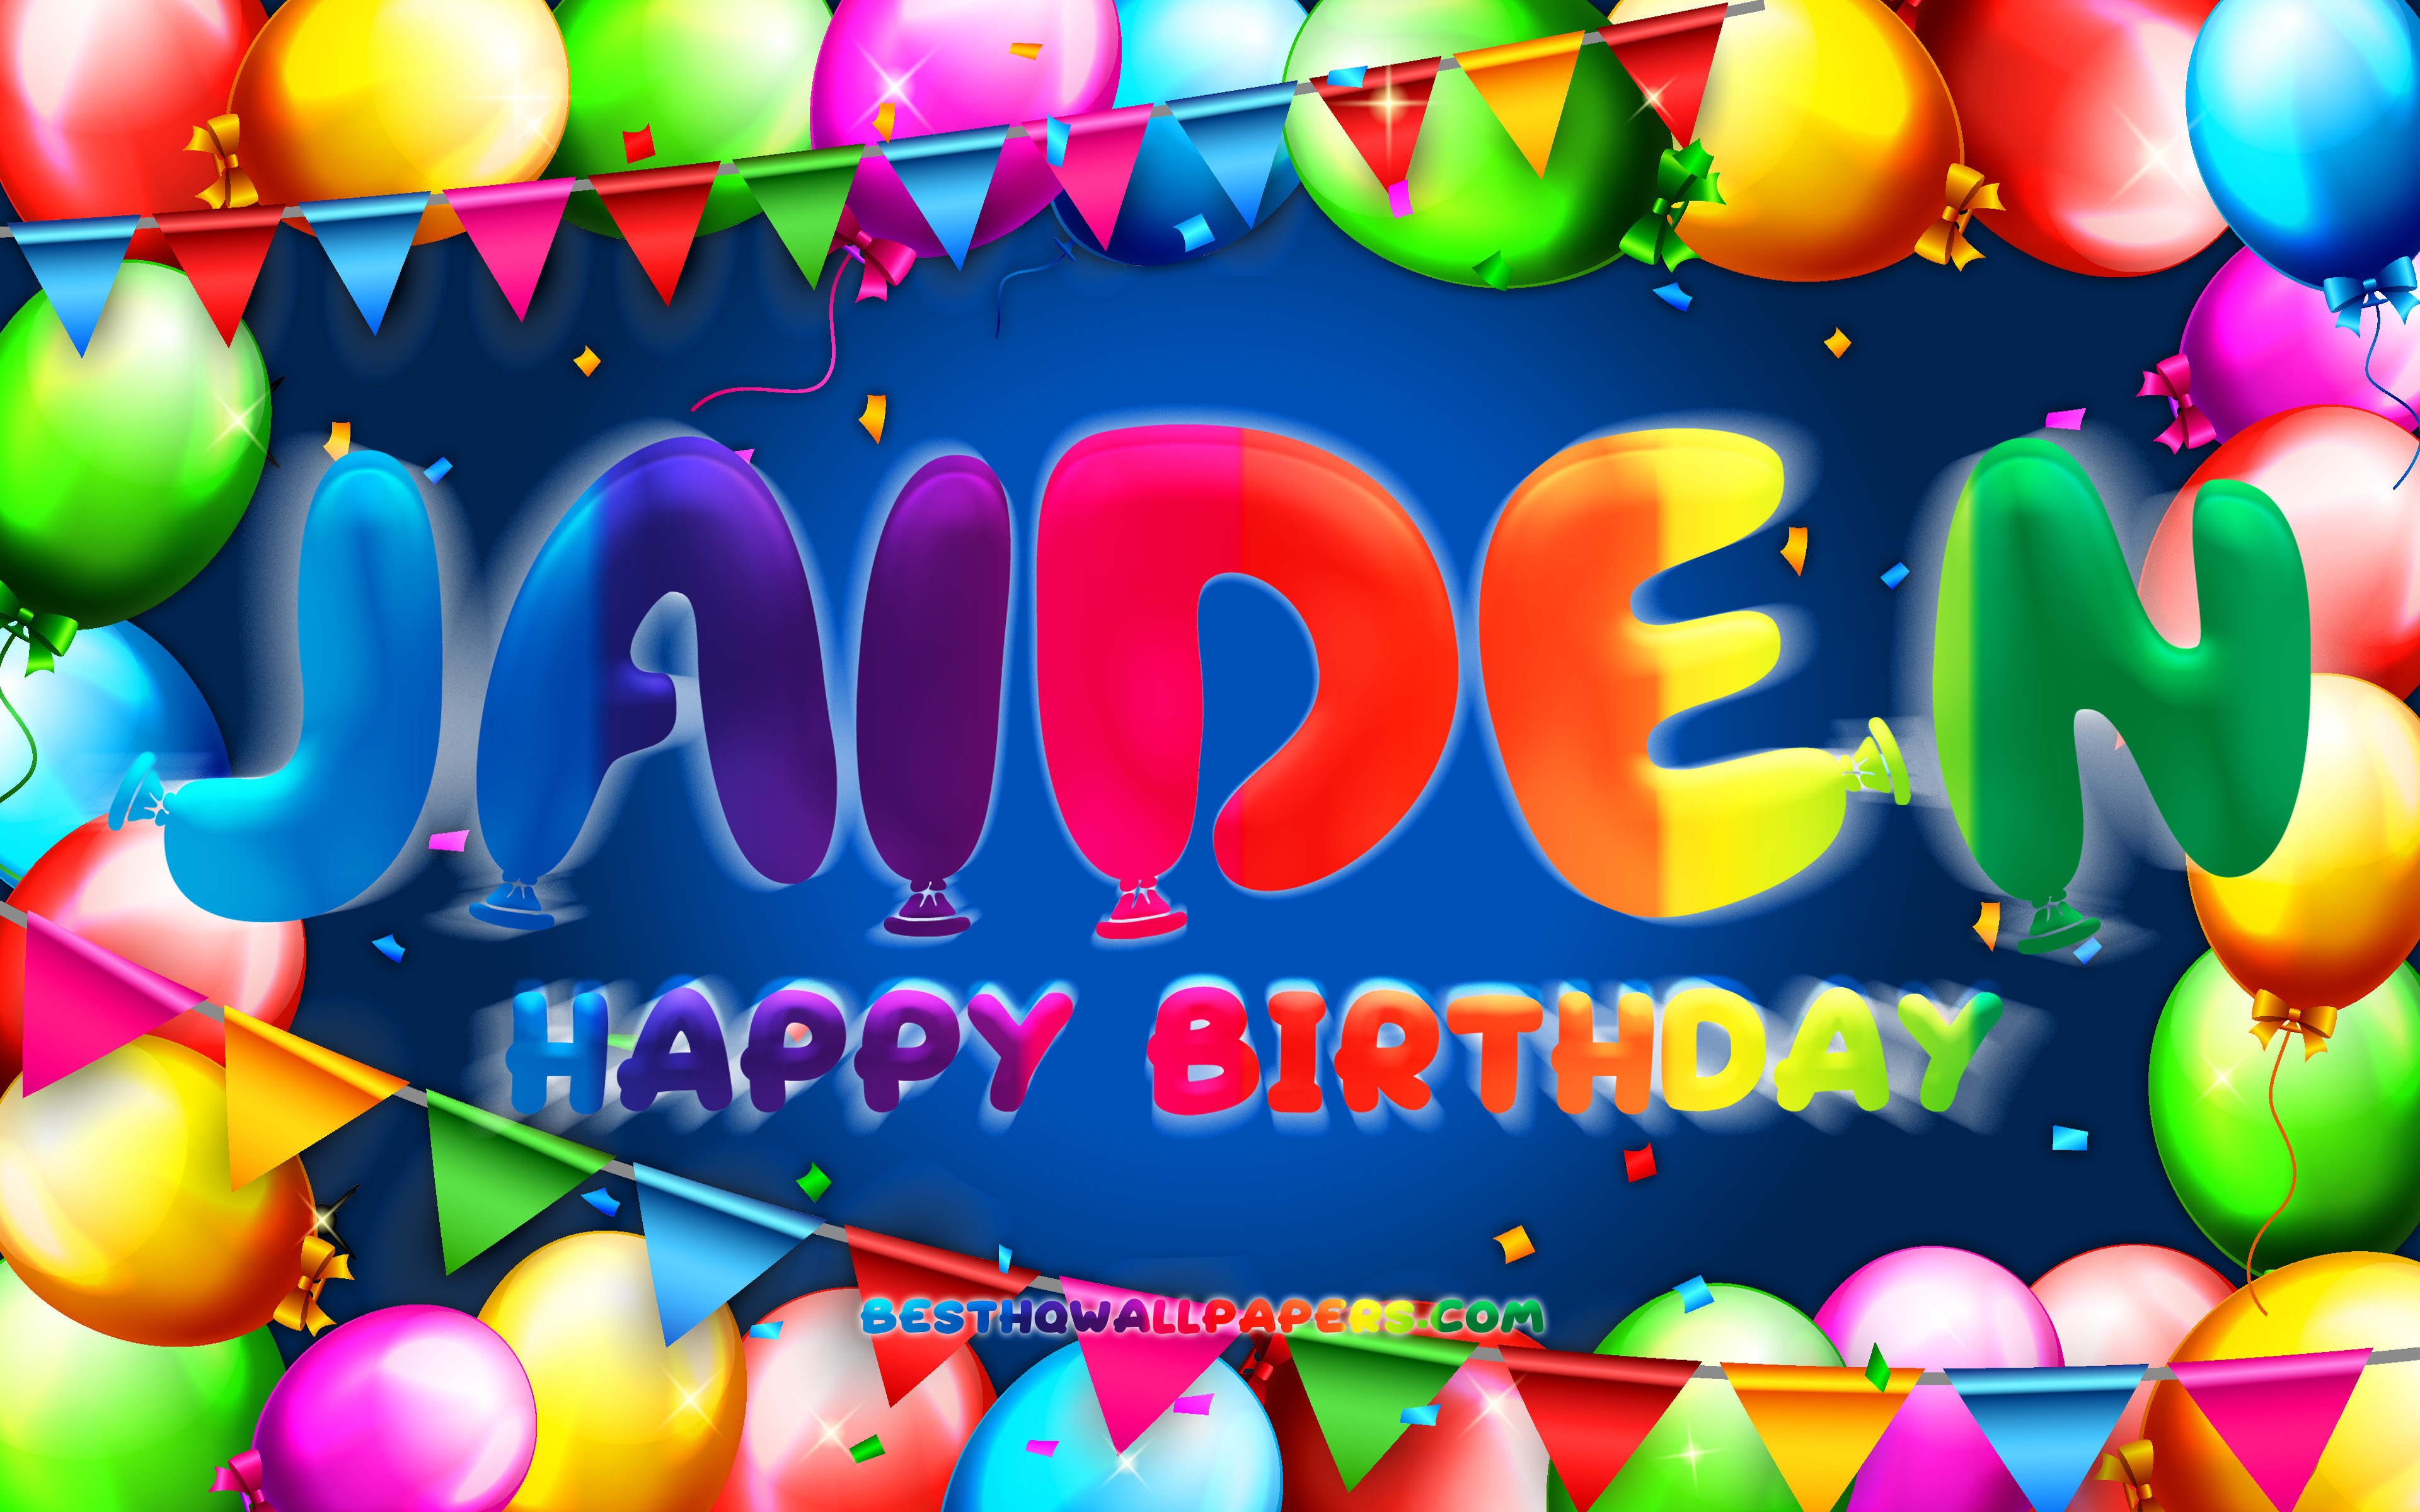 Download wallpapers Happy Birthday Jaiden 4k colorful balloon frame  Jaiden name blue background Jaiden Happy Birthday Jaiden Birthday  popular american male names Birthday concept Jaiden for desktop with  resolution 3840x2400 High Quality